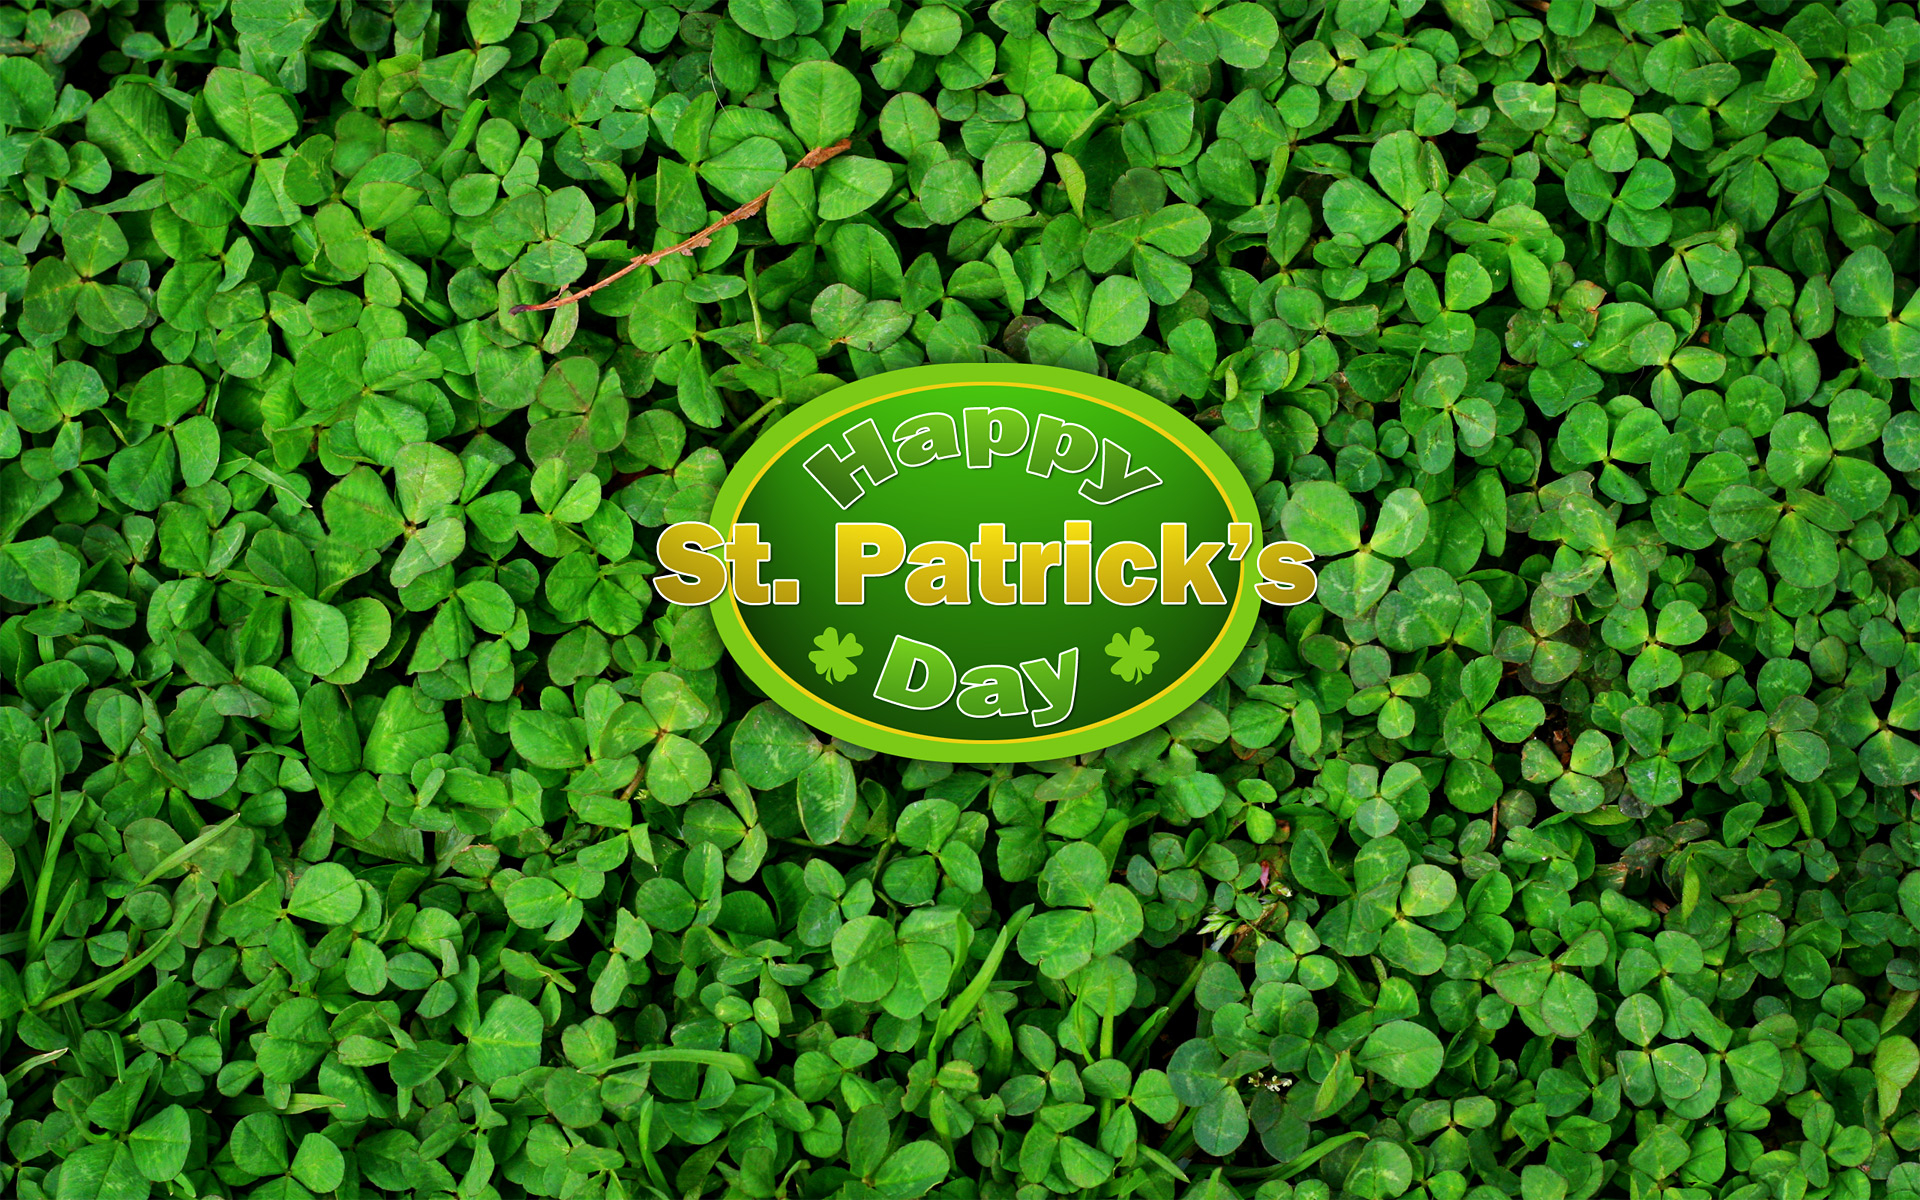 st patrick's day, holiday, clover, green Image for desktop